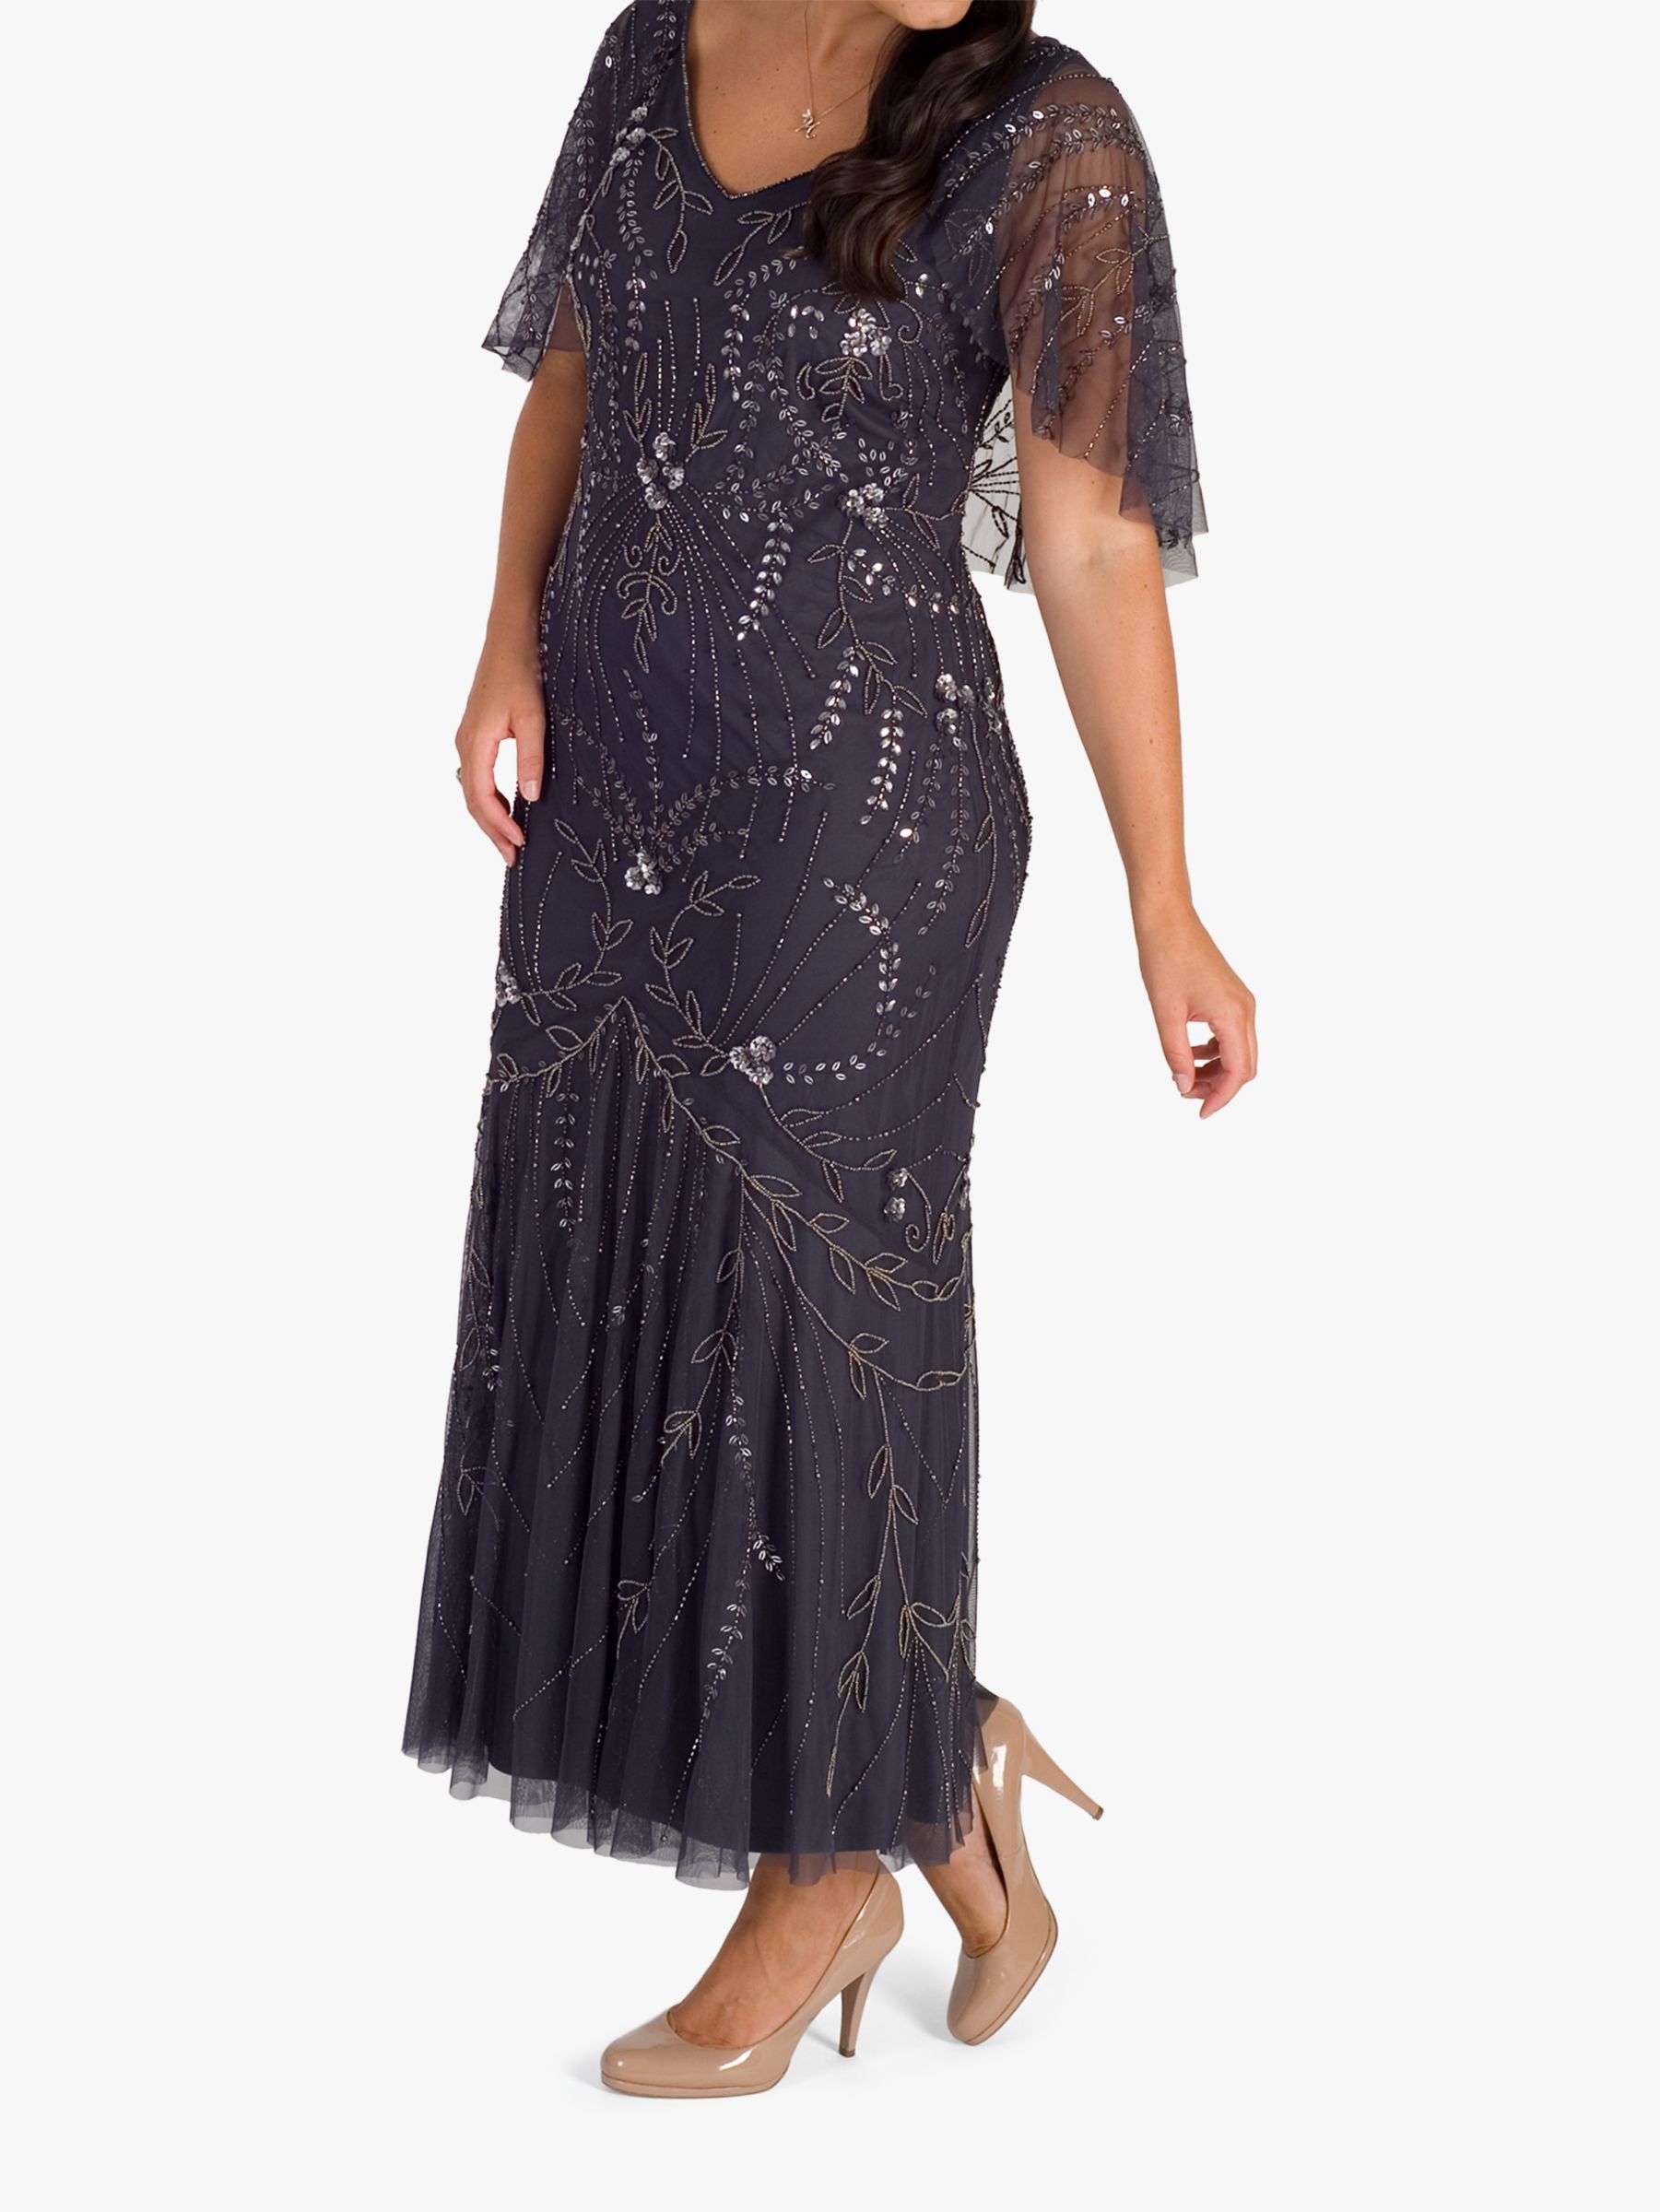 Chesca Cape Trim Beaded Mesh Dress, Pewter at John Lewis & Partners